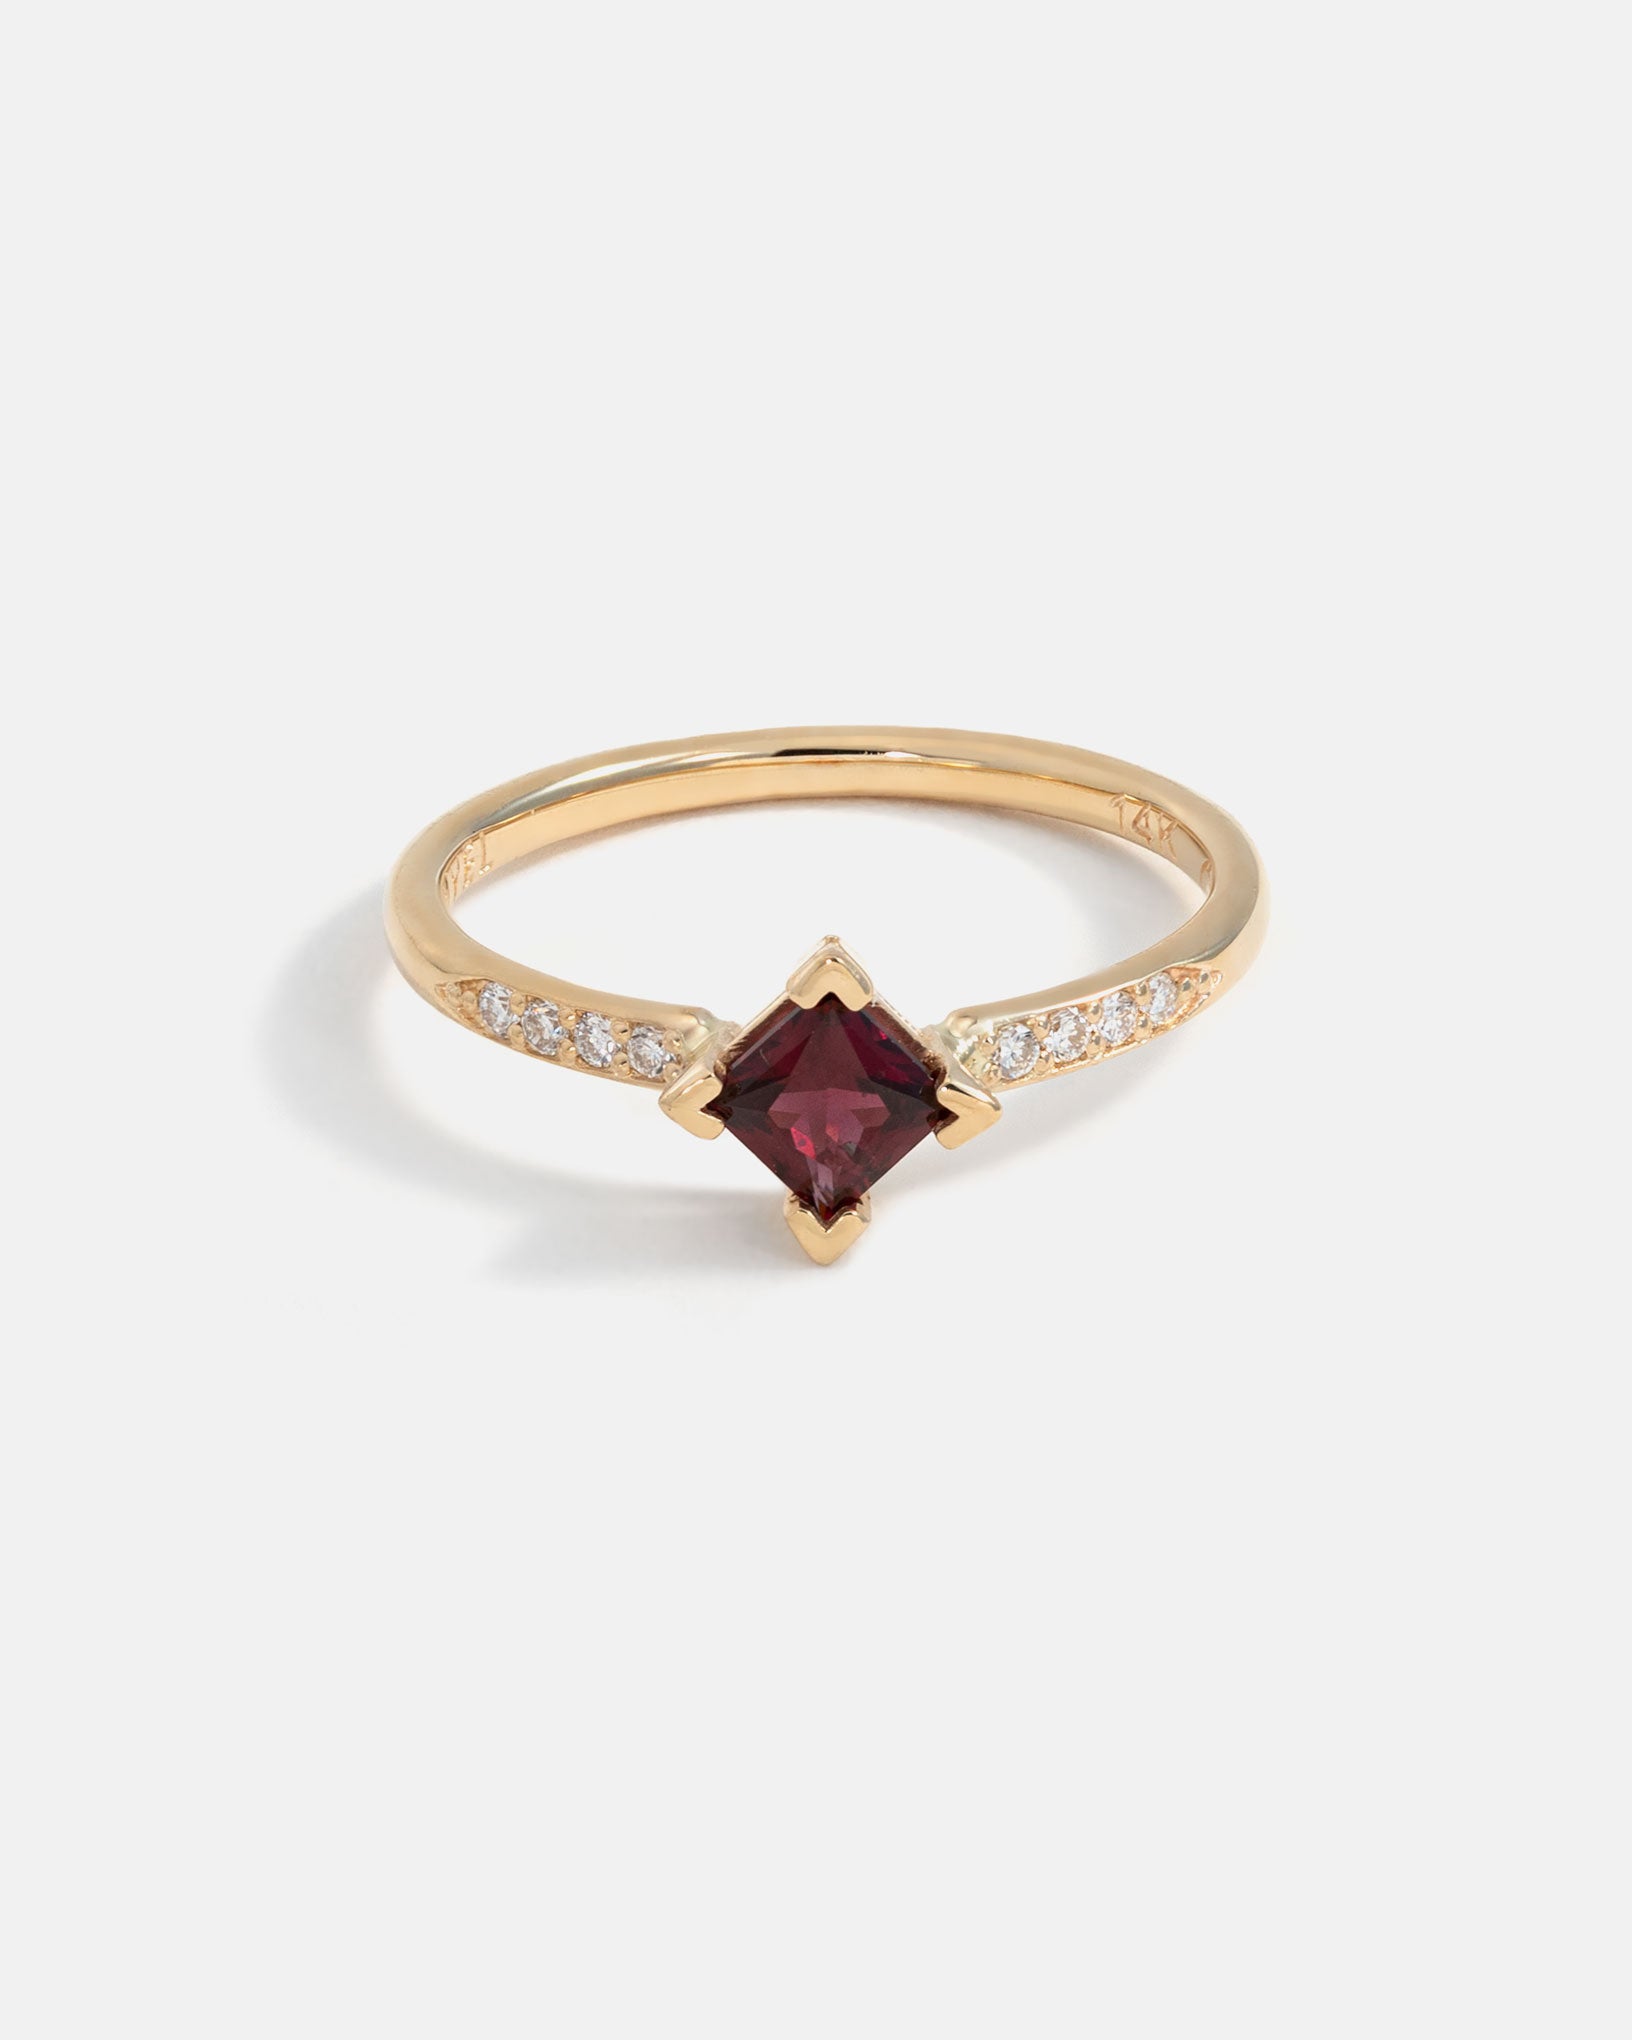 Harmony Ring in Fairmined Gold with Anthill Garnet and lab grown Diamonds